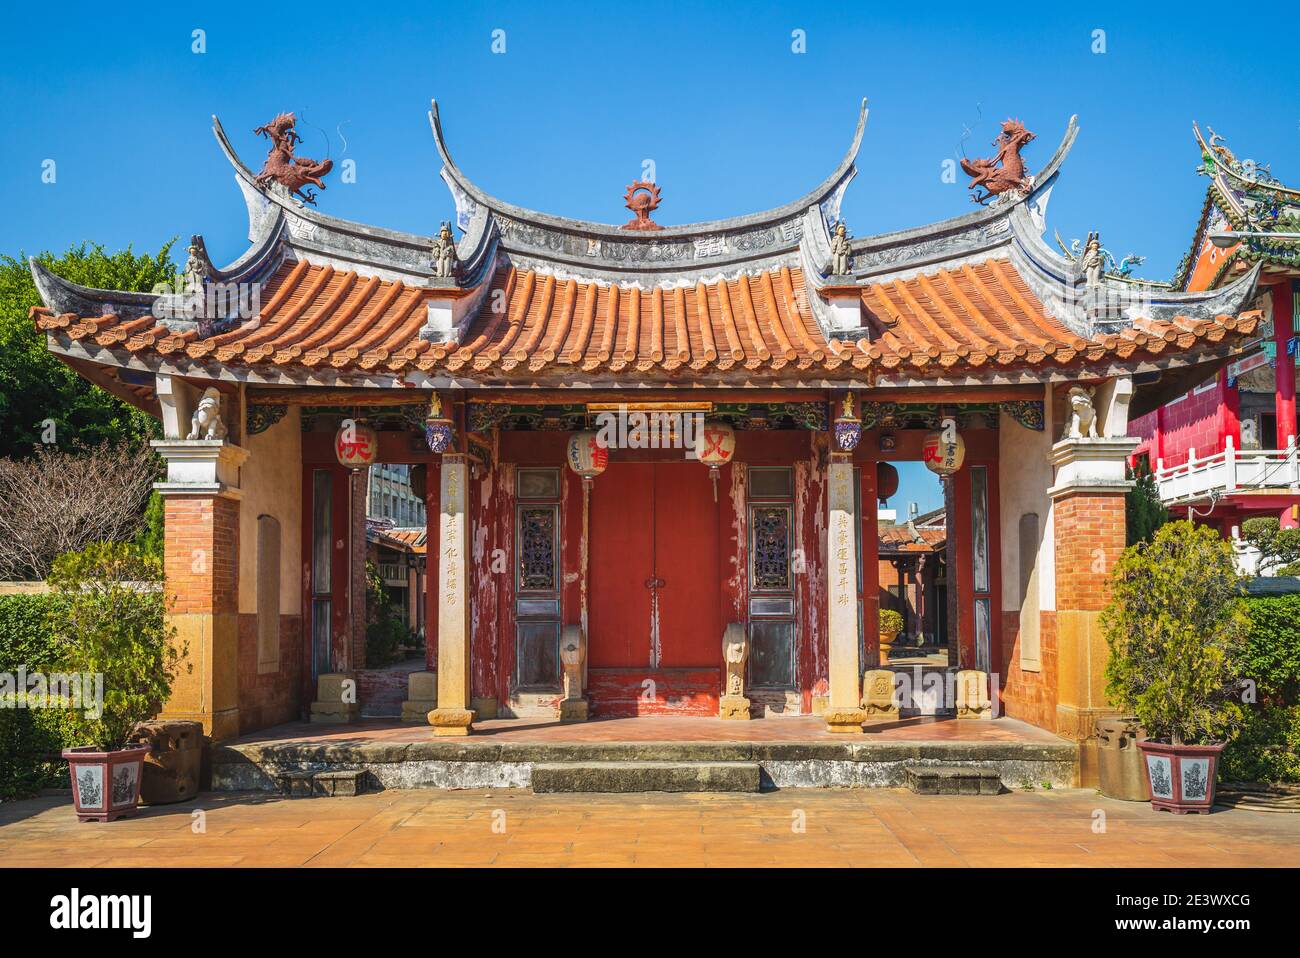 January 13, 2021: Jhen Wen Academy, a former tutorial academy in Xiluo Township, Yunlin, Taiwan, was originally built in 1797 as Wen Chang Temple to w Stock Photo